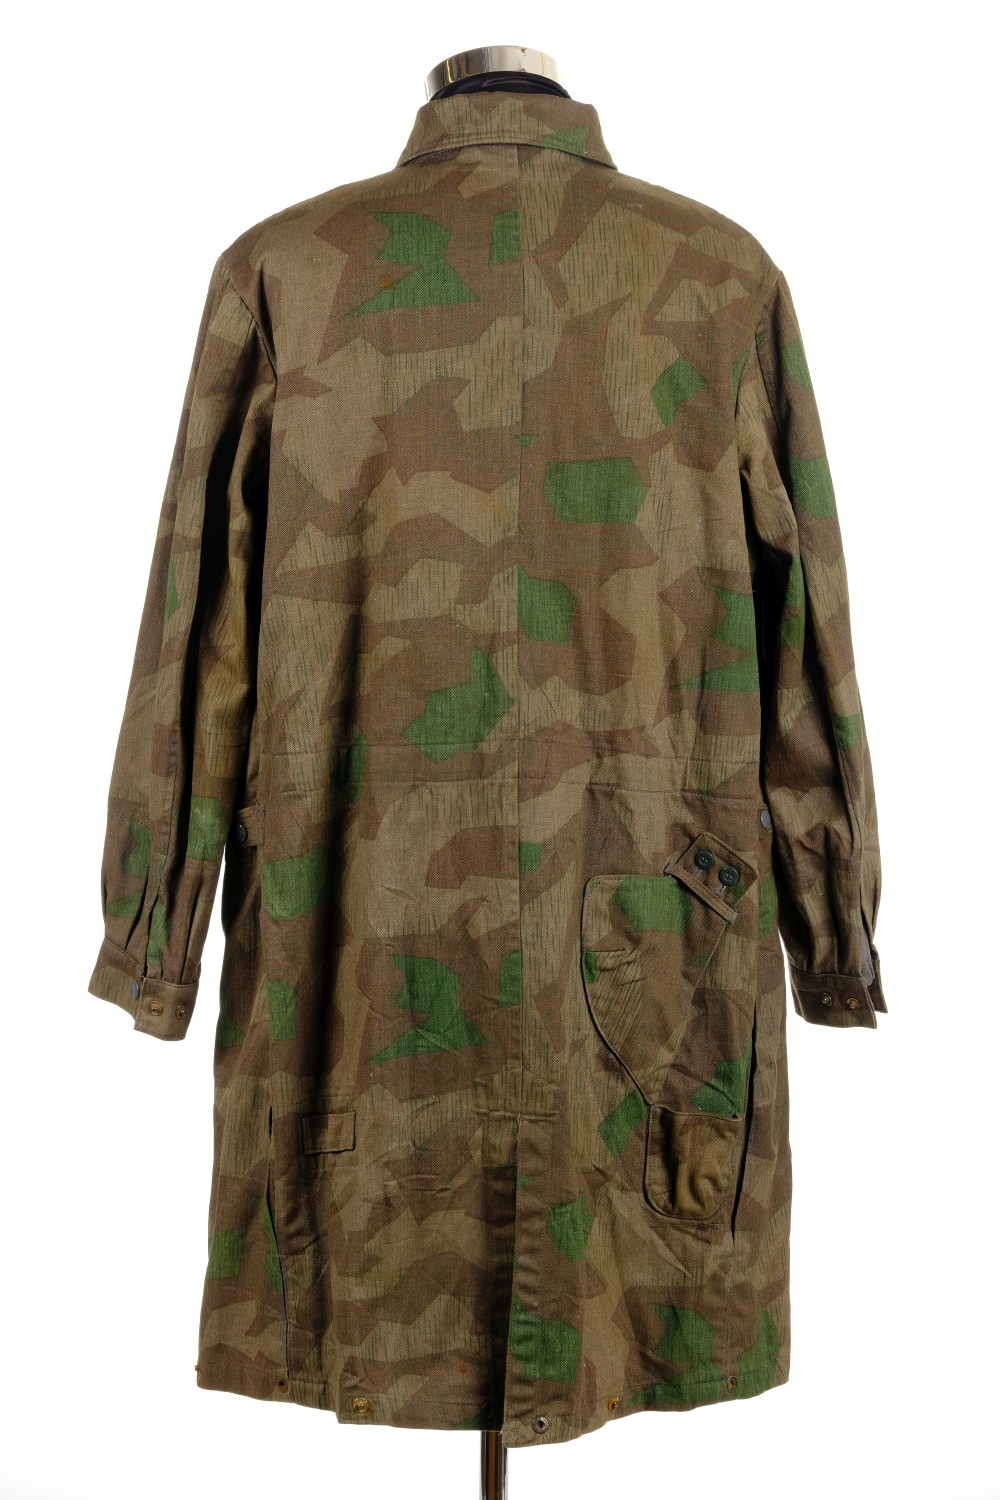 *Third Reich. Fallschirmjager (Paratroopers) camouflage smock, with cloth eagle badge, grey - Image 2 of 2